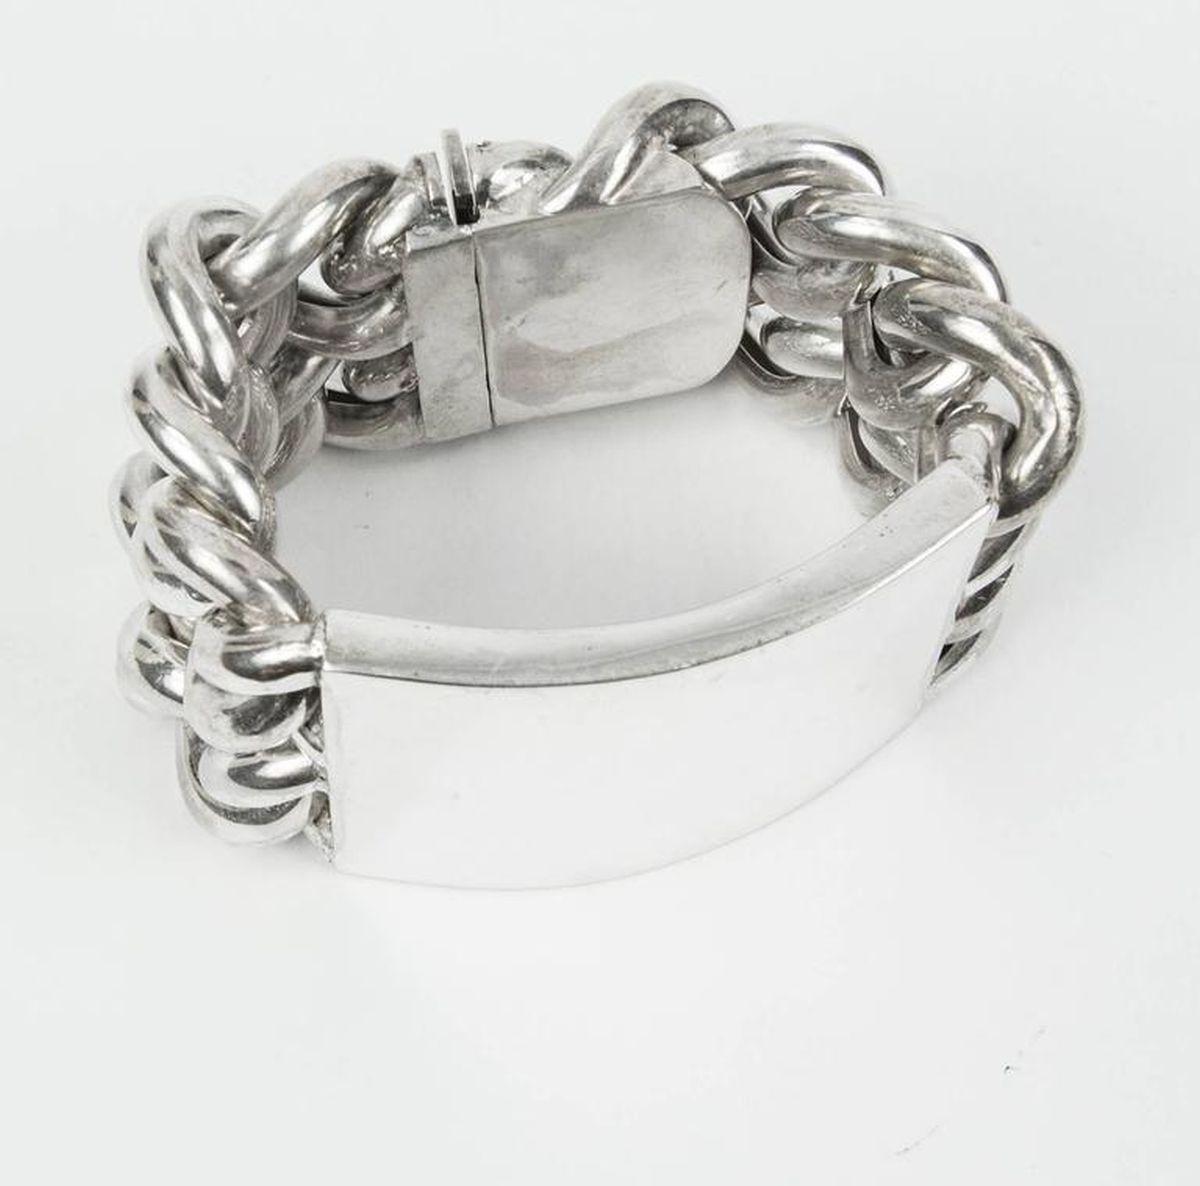 Simply Fabulous! Massive Sterling Silver Open Link Statement ID Bracelet. Measuring approx. 7.25” long and weighing approx. 2,076 g. We offer engraving of your choice. New-Never worn. More Beautiful in real time! A Dynamic piece you'll turn to time